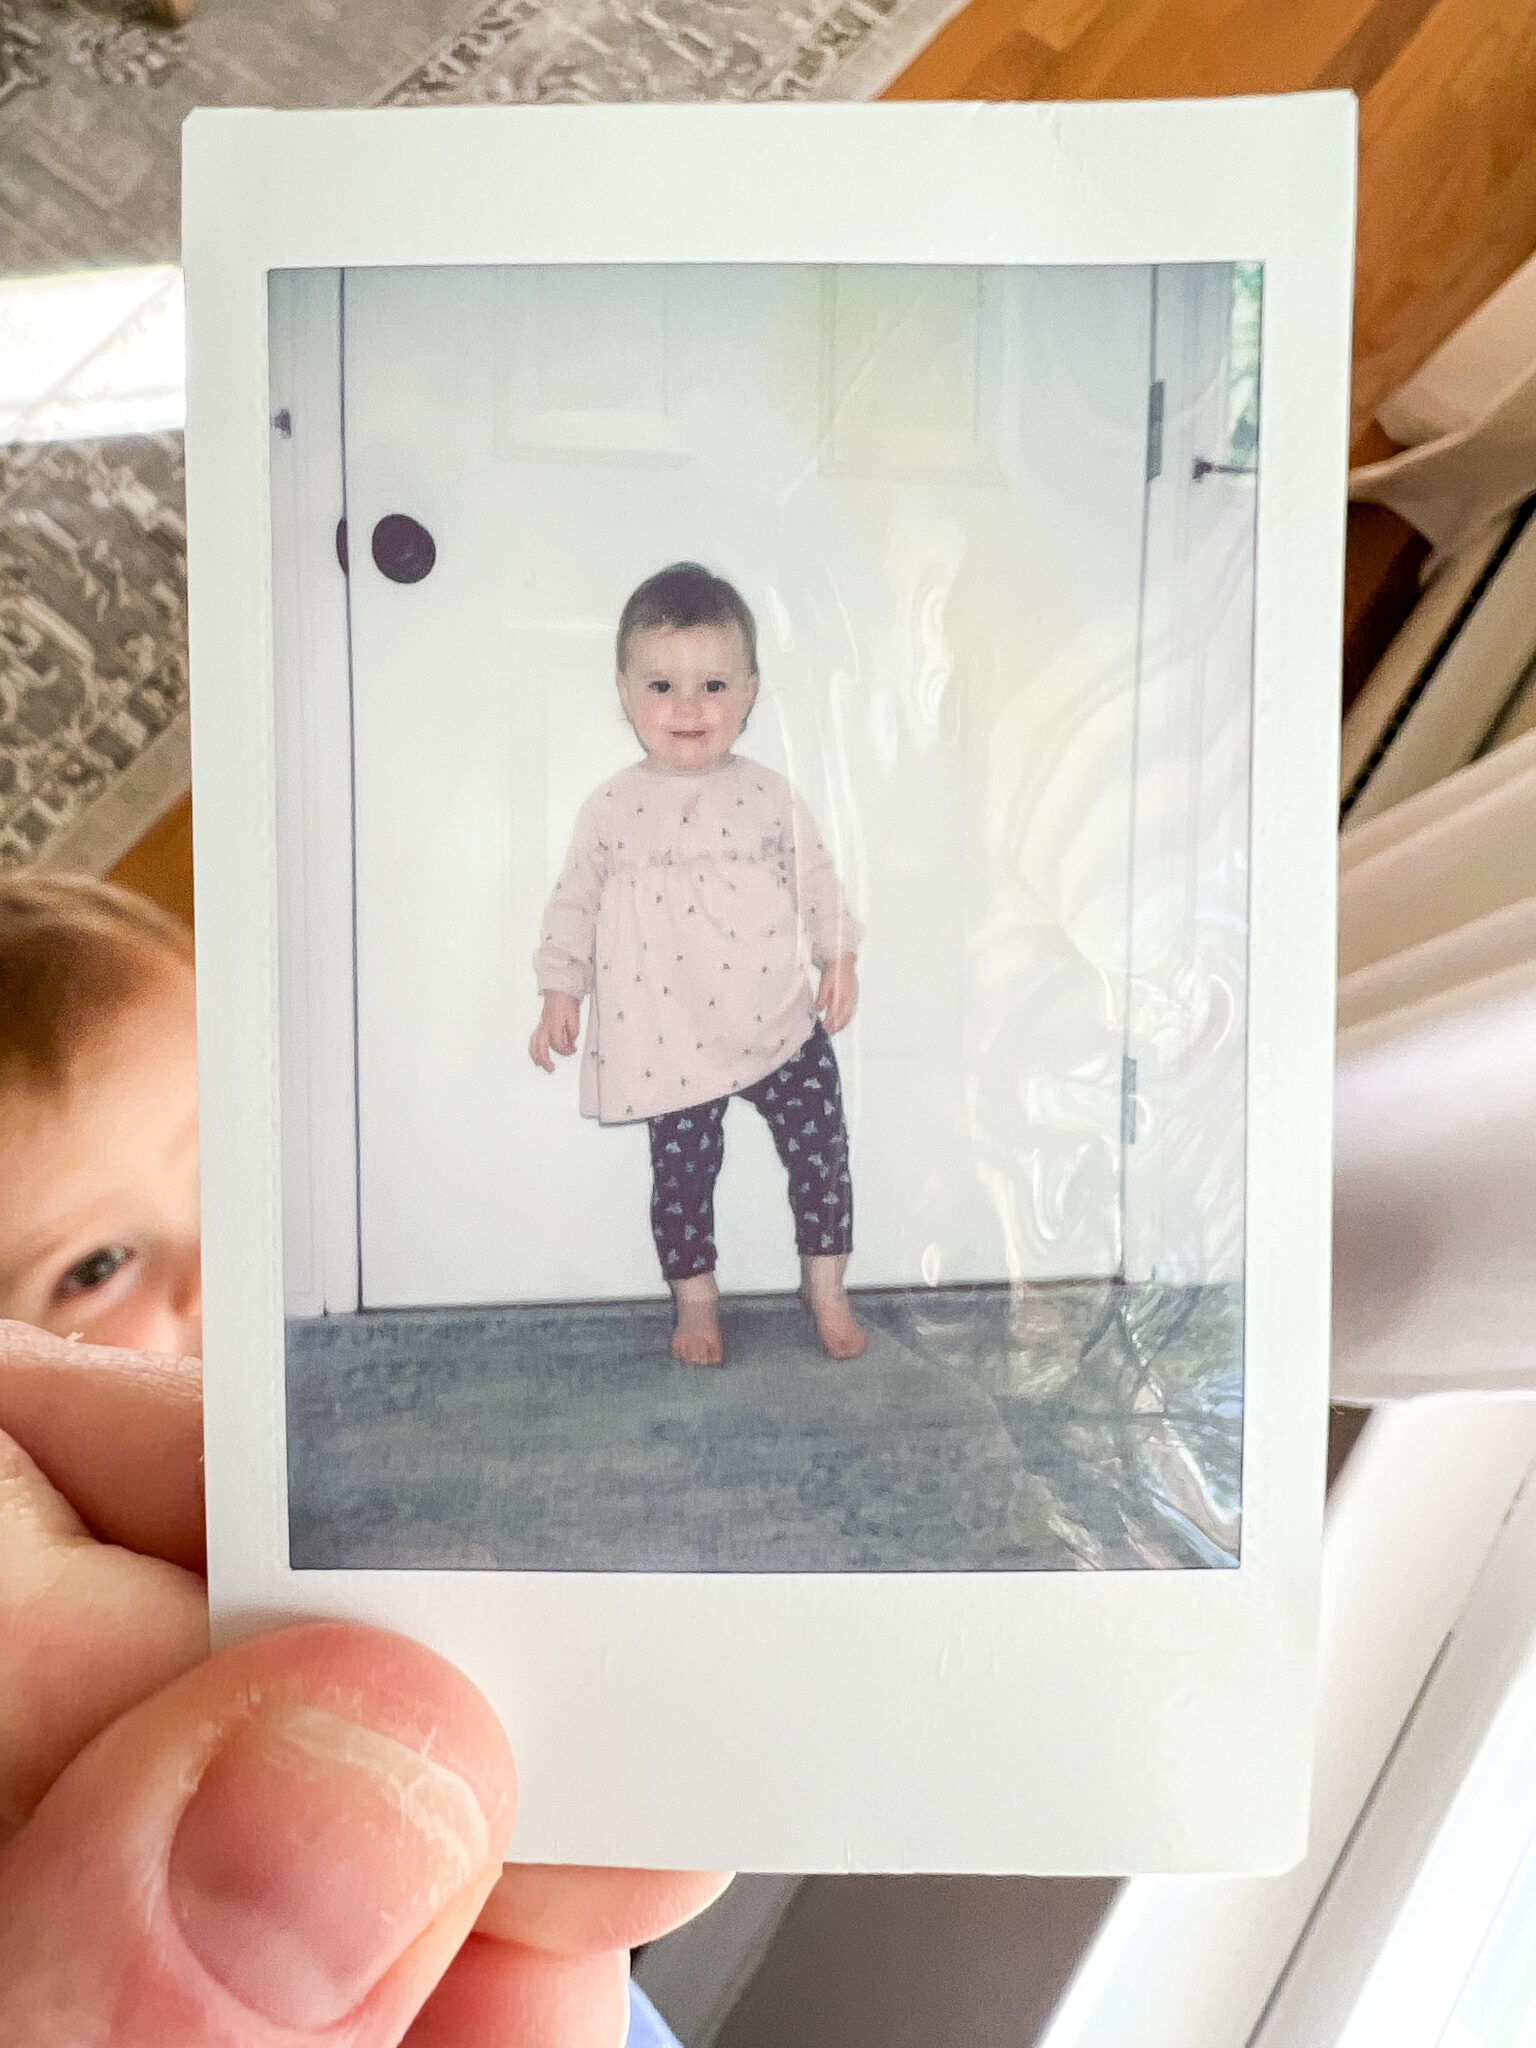 polaroid picture of toddler with toddler in background trying to grab the photo